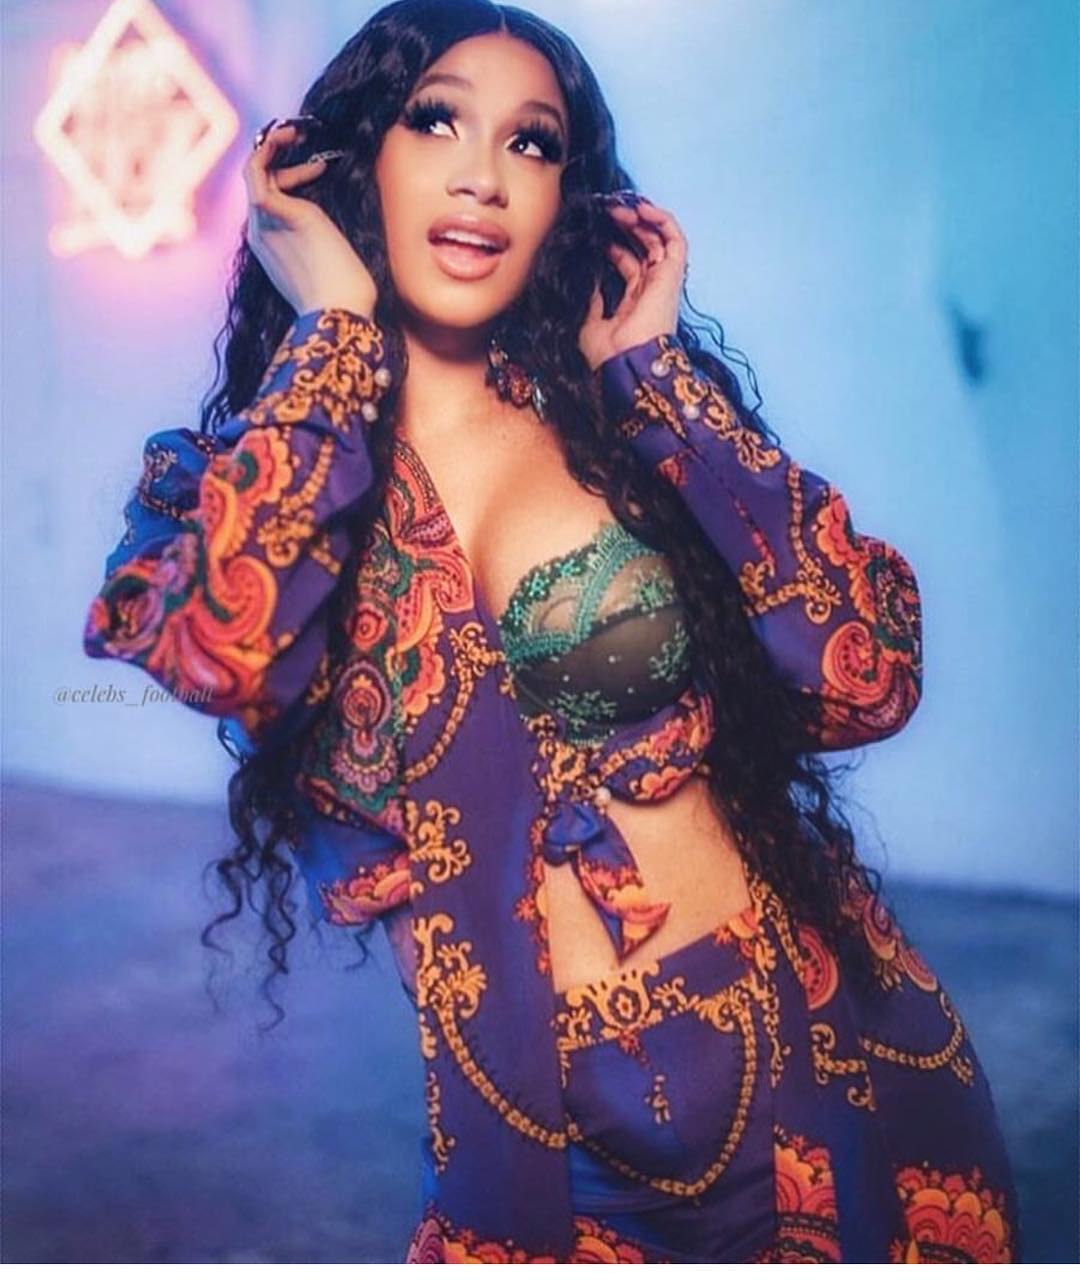 60+ Hottest Cardi B Bikini Pictures Are So Damn Sexy That They Will Rock Your World | Best Of Comic Books